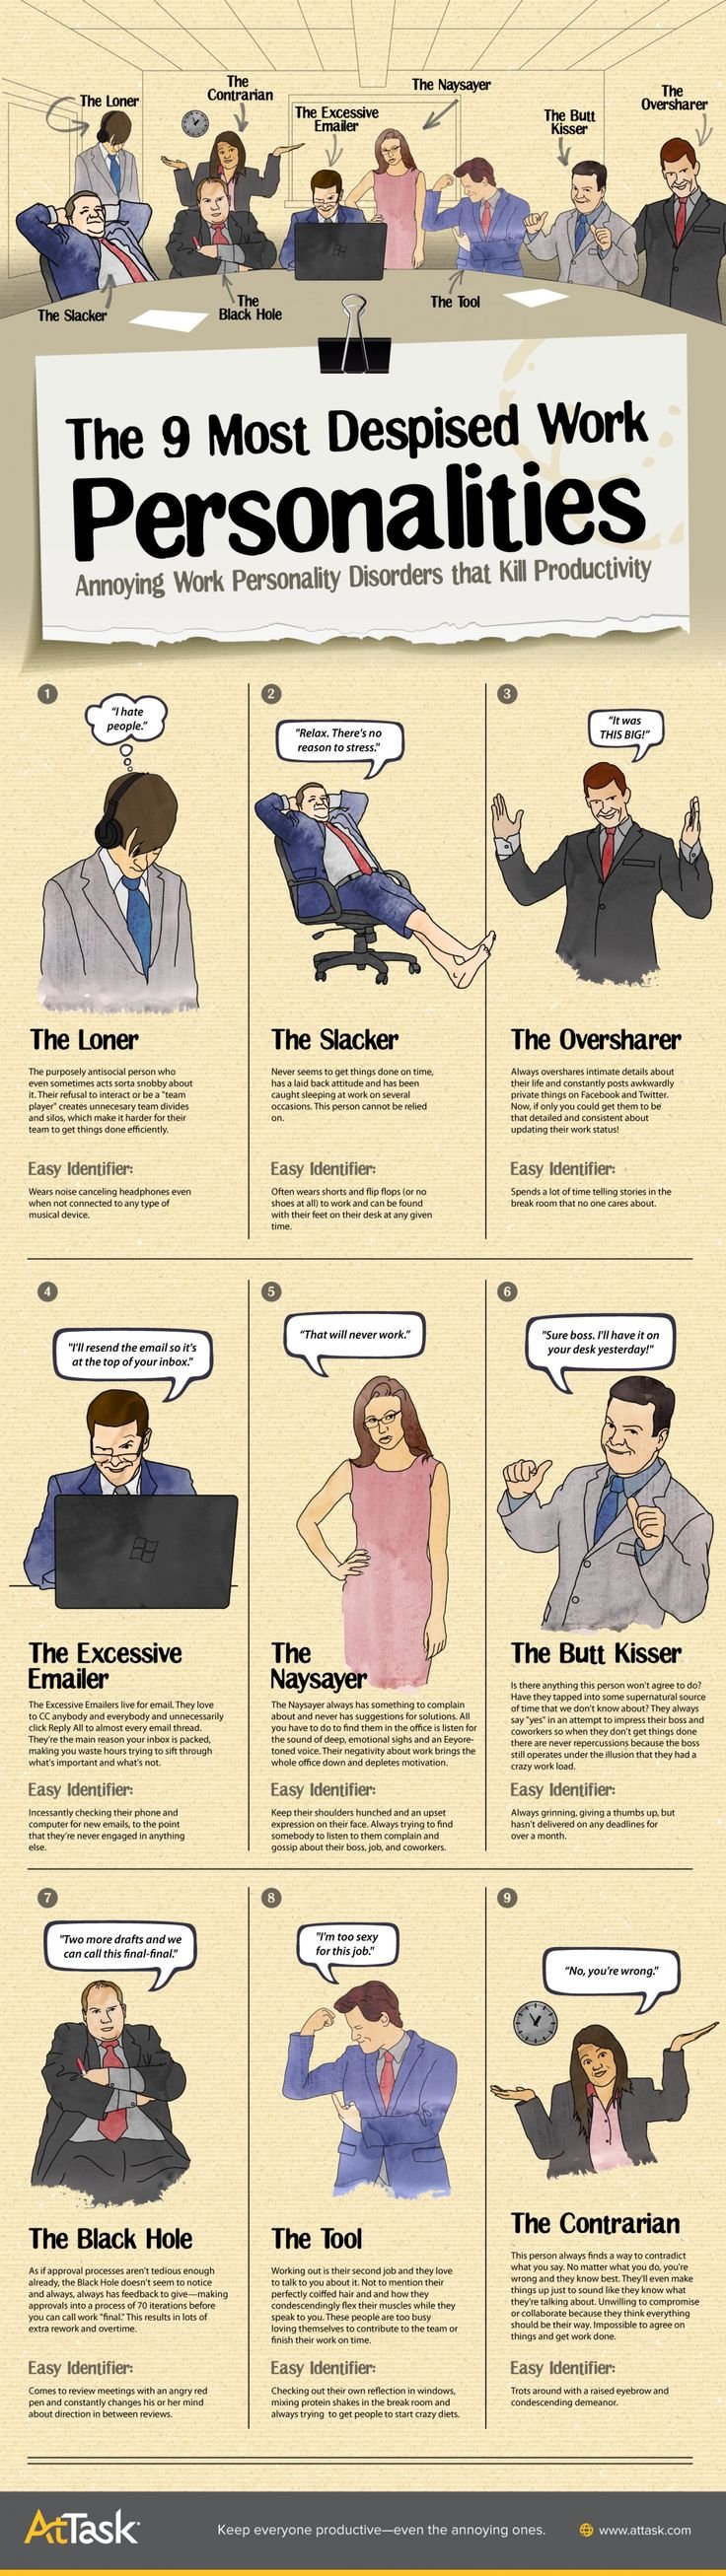 The 9 most despised work personalities